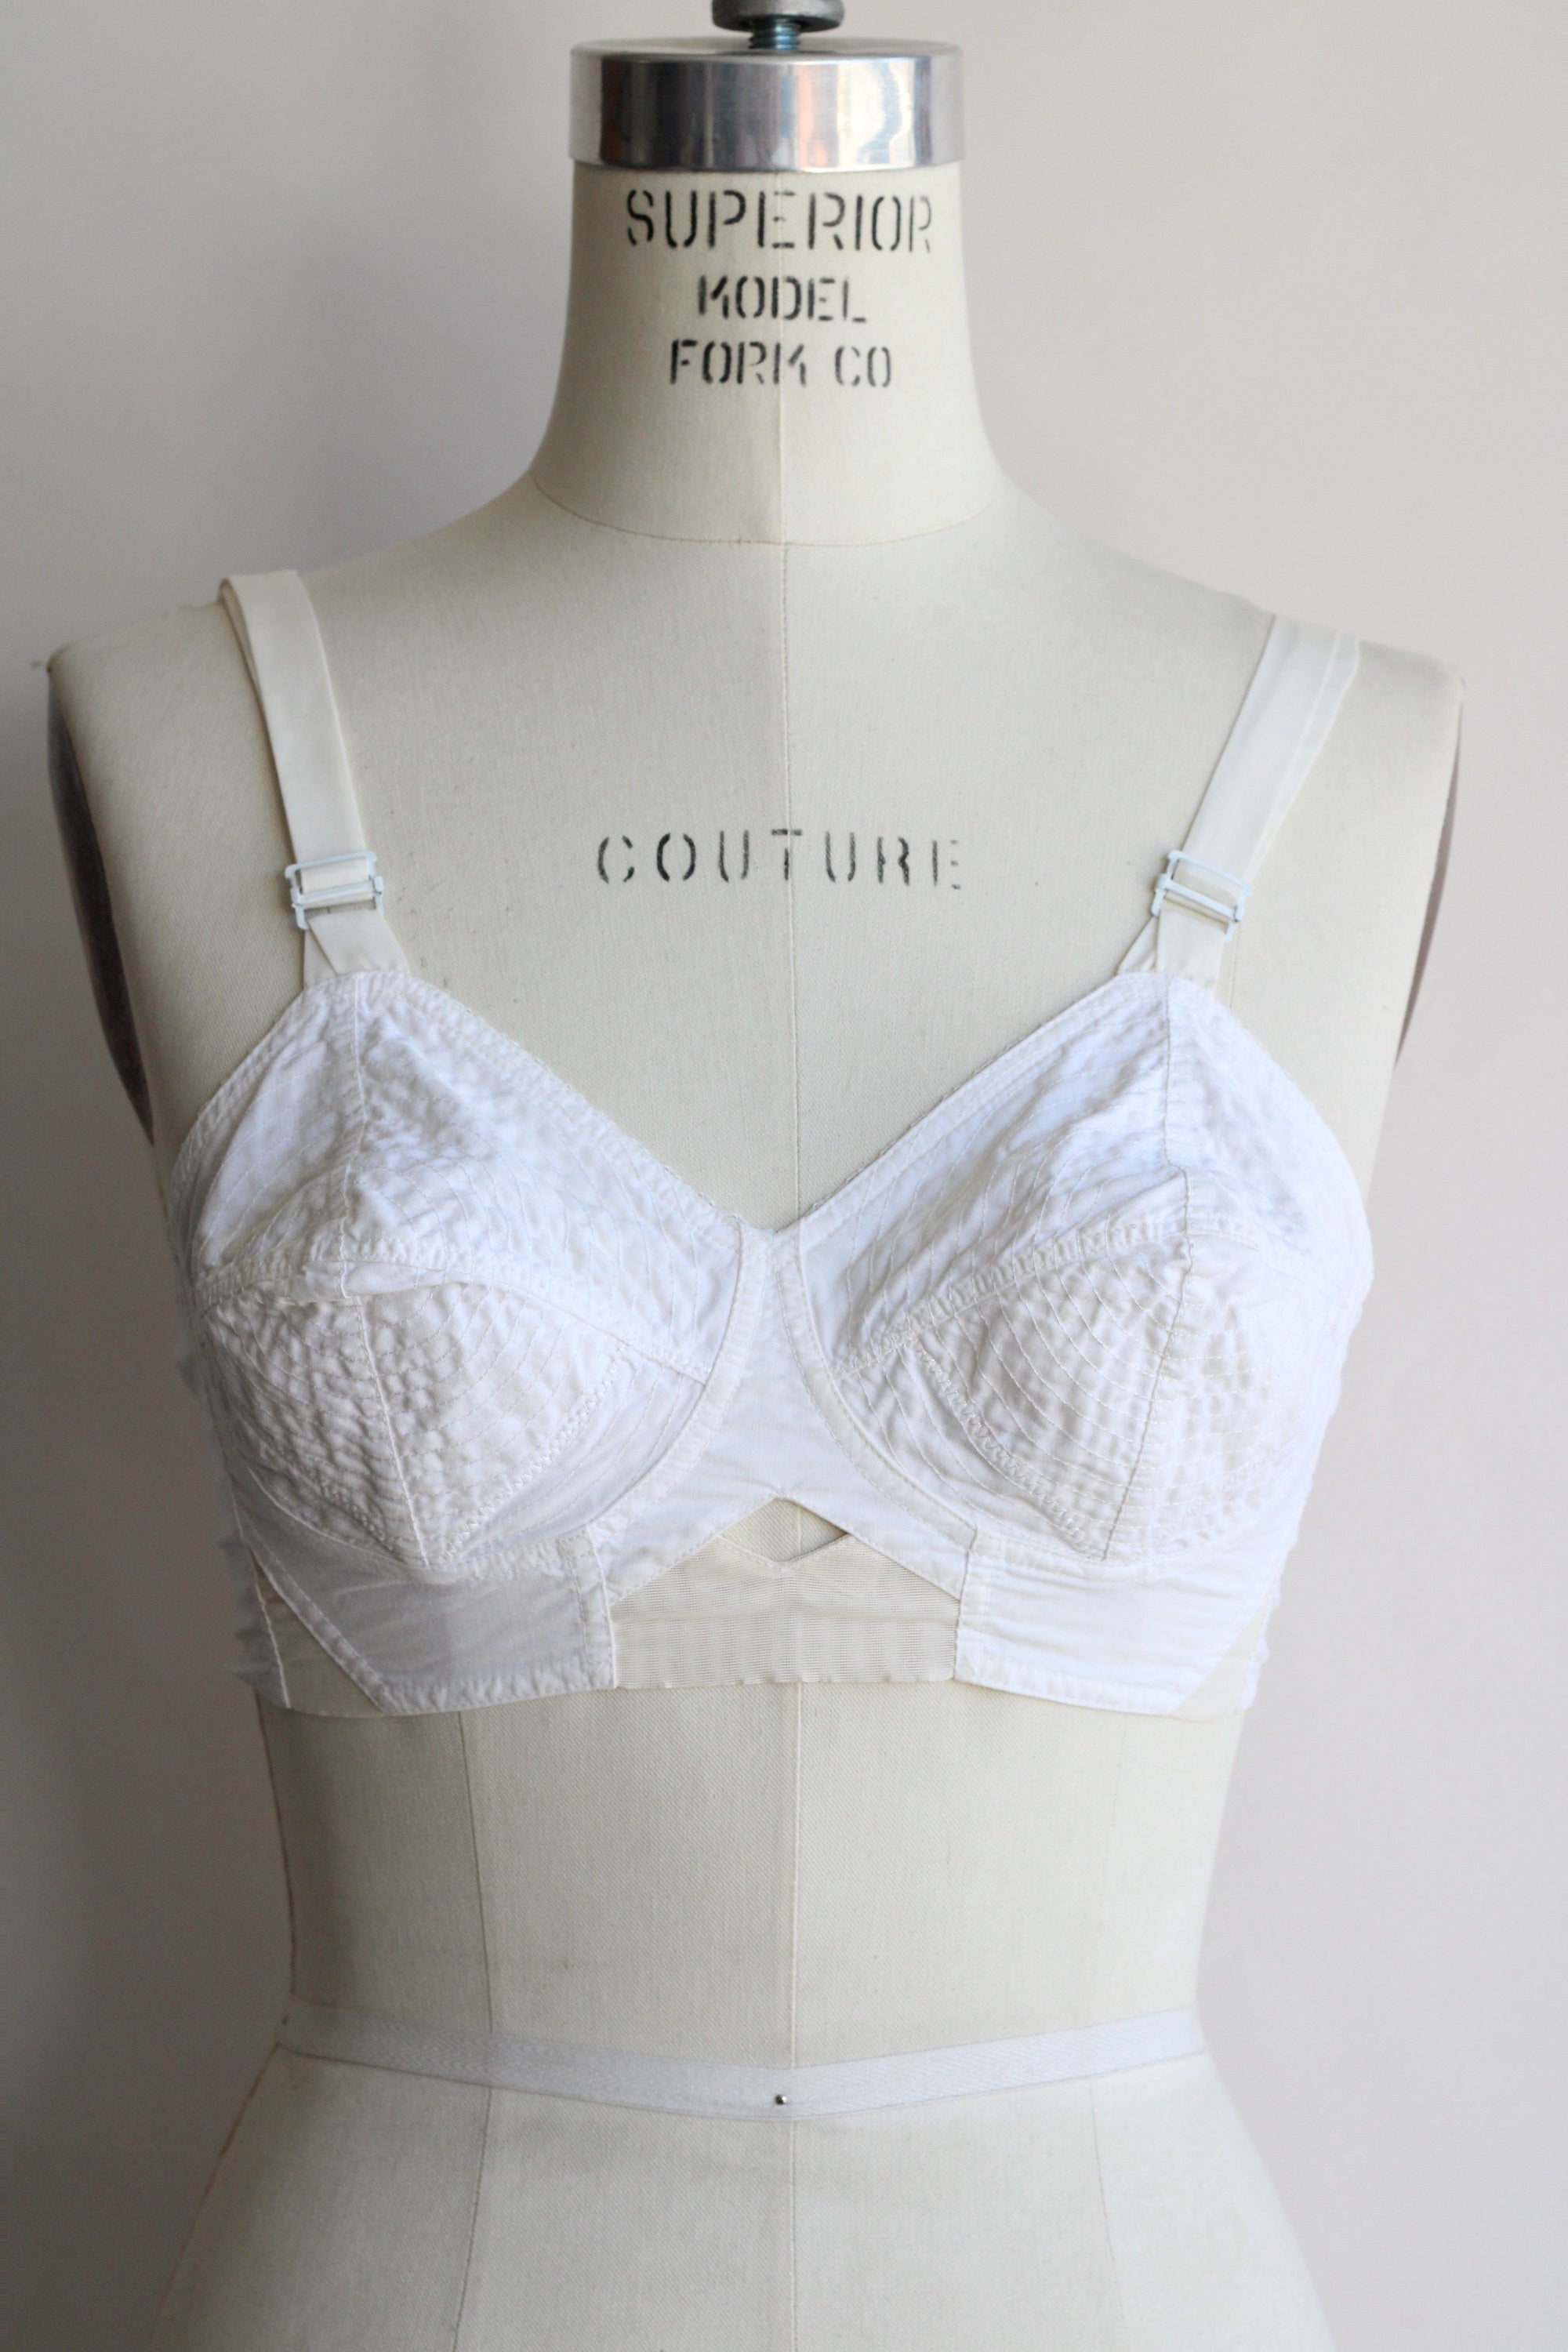 Vintage 1950s Bullet Bra 40 C Cotton Deadstock With Tags 50s Pinup Style  Sears Cage Bra -  Hong Kong